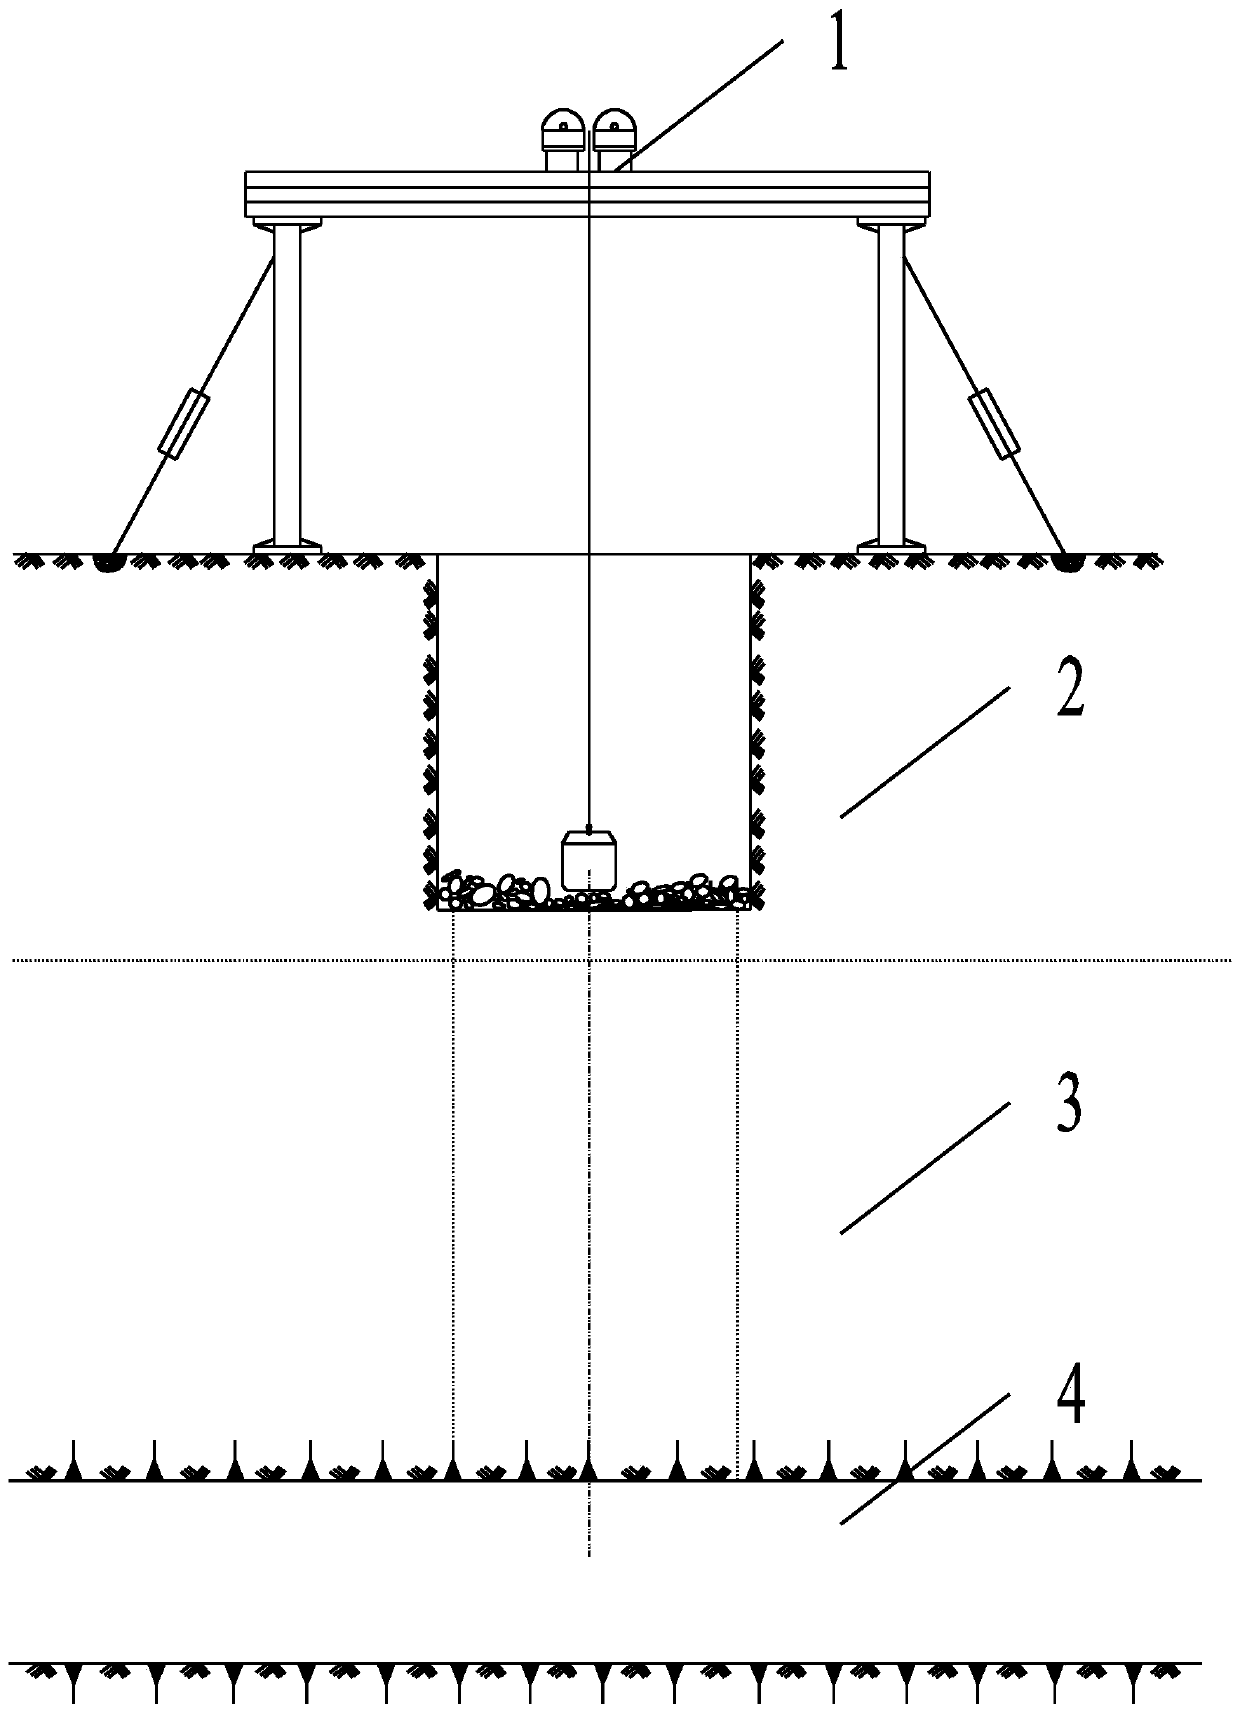 Forward-reverse-forward three-stage drilling mechanical rock breaking and shaft sinking method